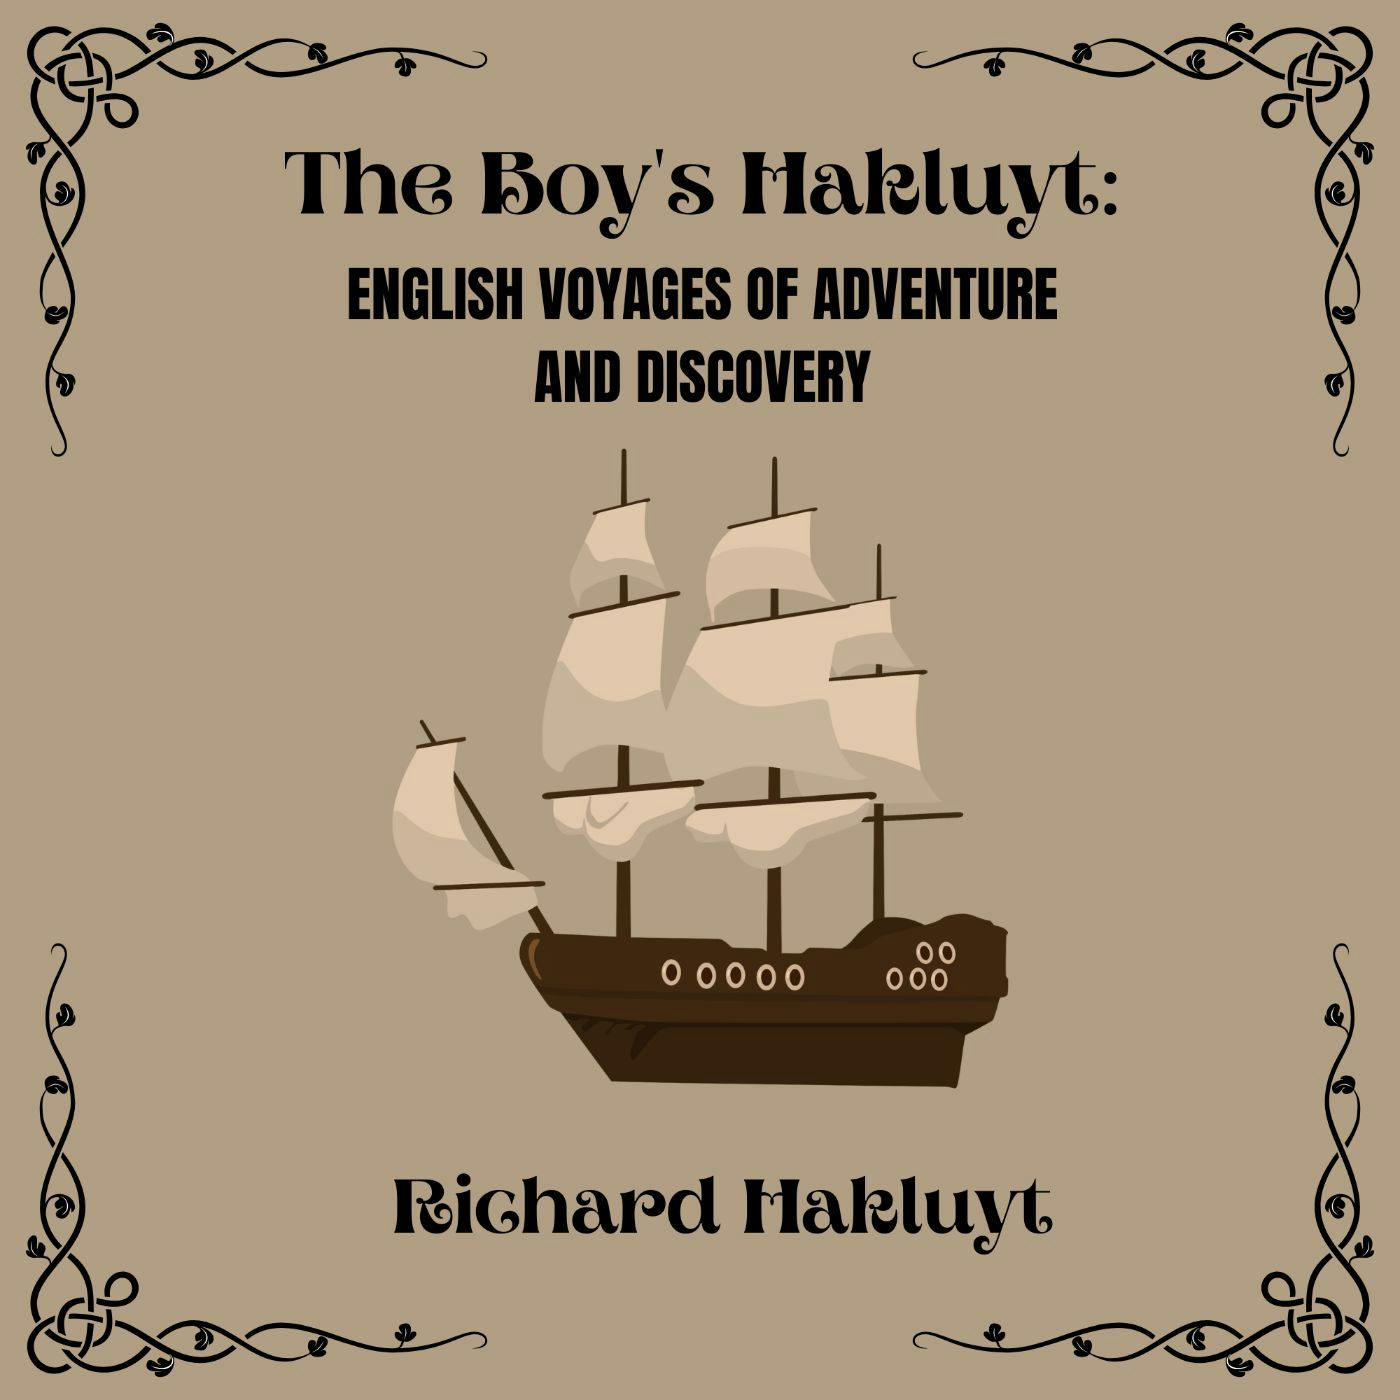 featured image - The Boy's Hakluyt: English Voyages of Adventure and Discovery by Richard Hakluyt - Table of Link